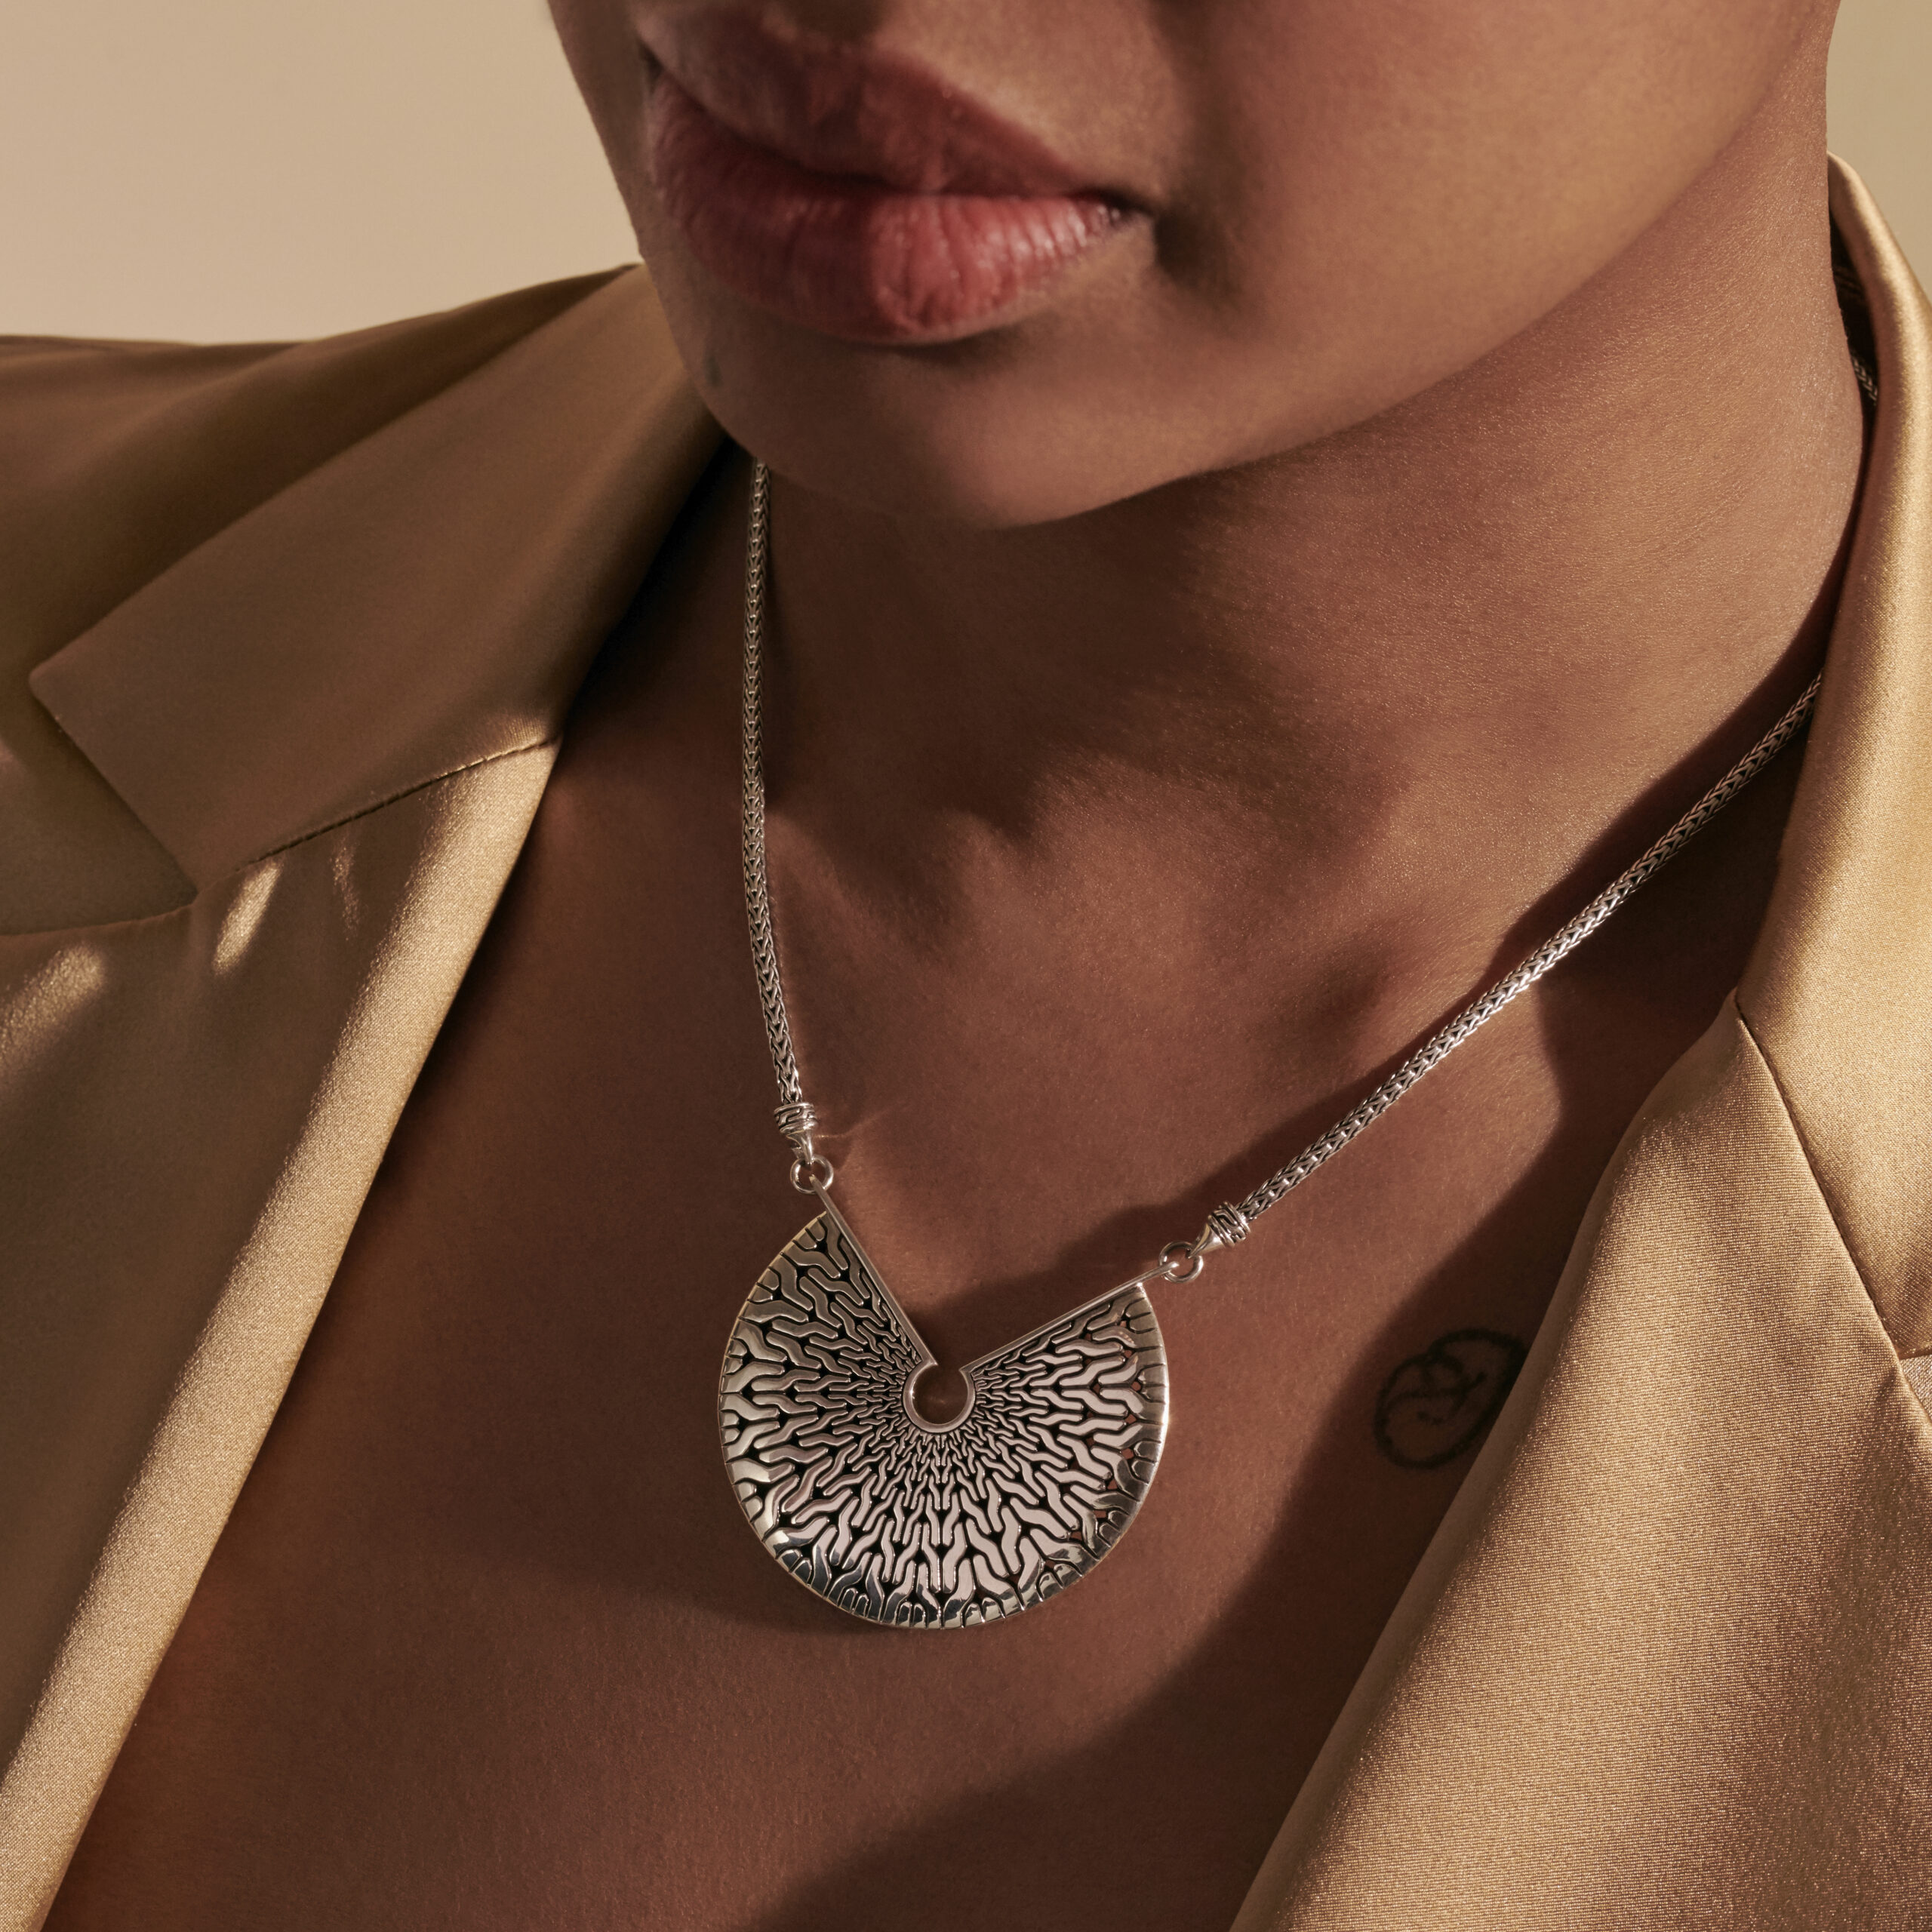 This necklace by John Hardy is crafted from sterling silver and features a radial classic chain design.